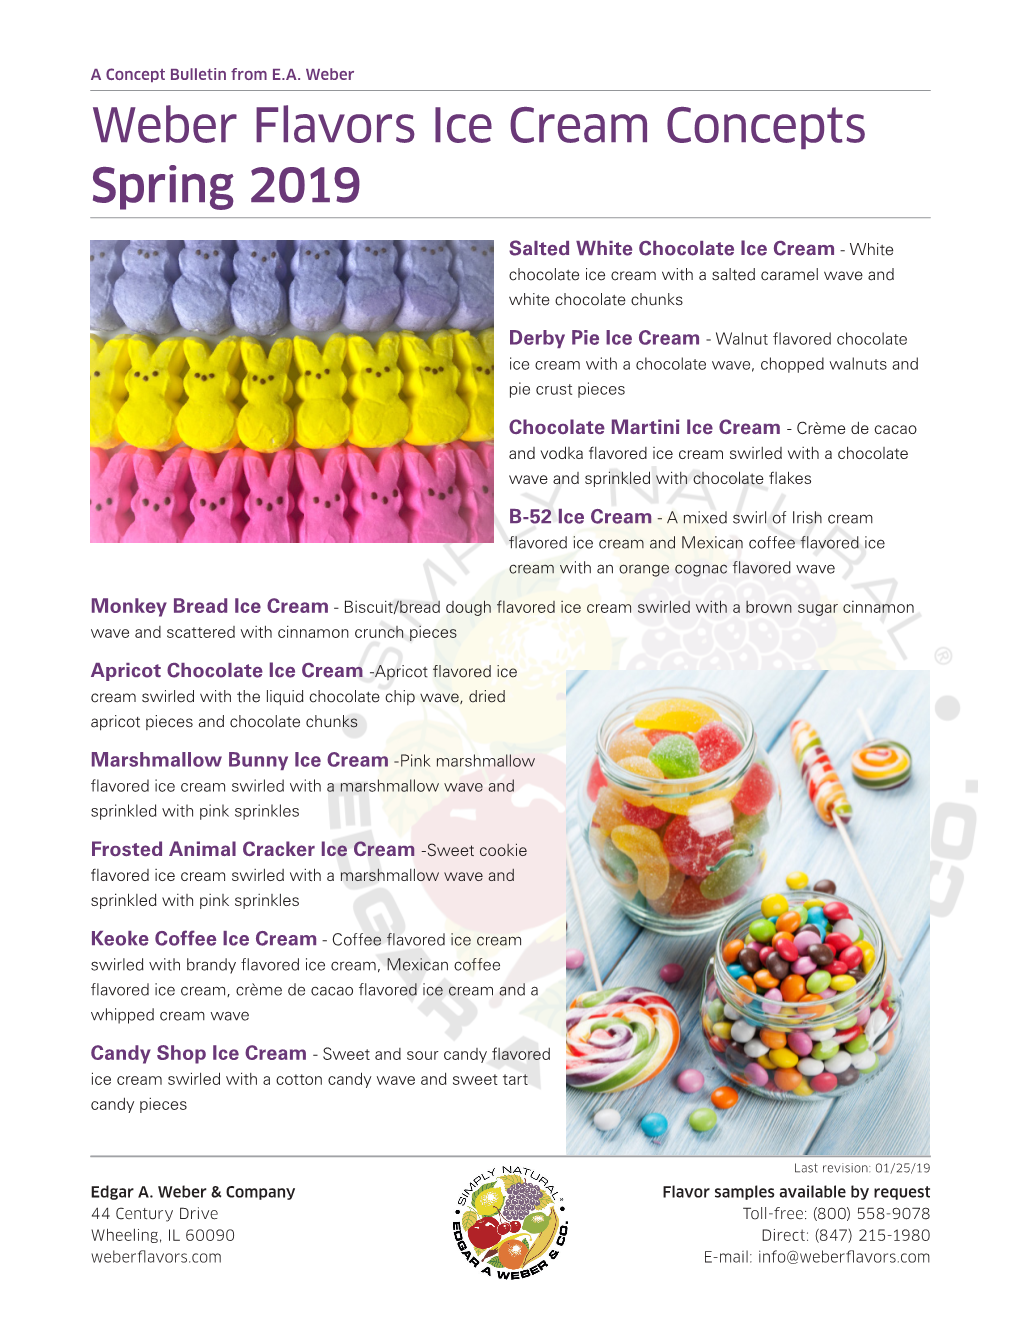 Weber Flavors Ice Cream Concepts Spring 2019